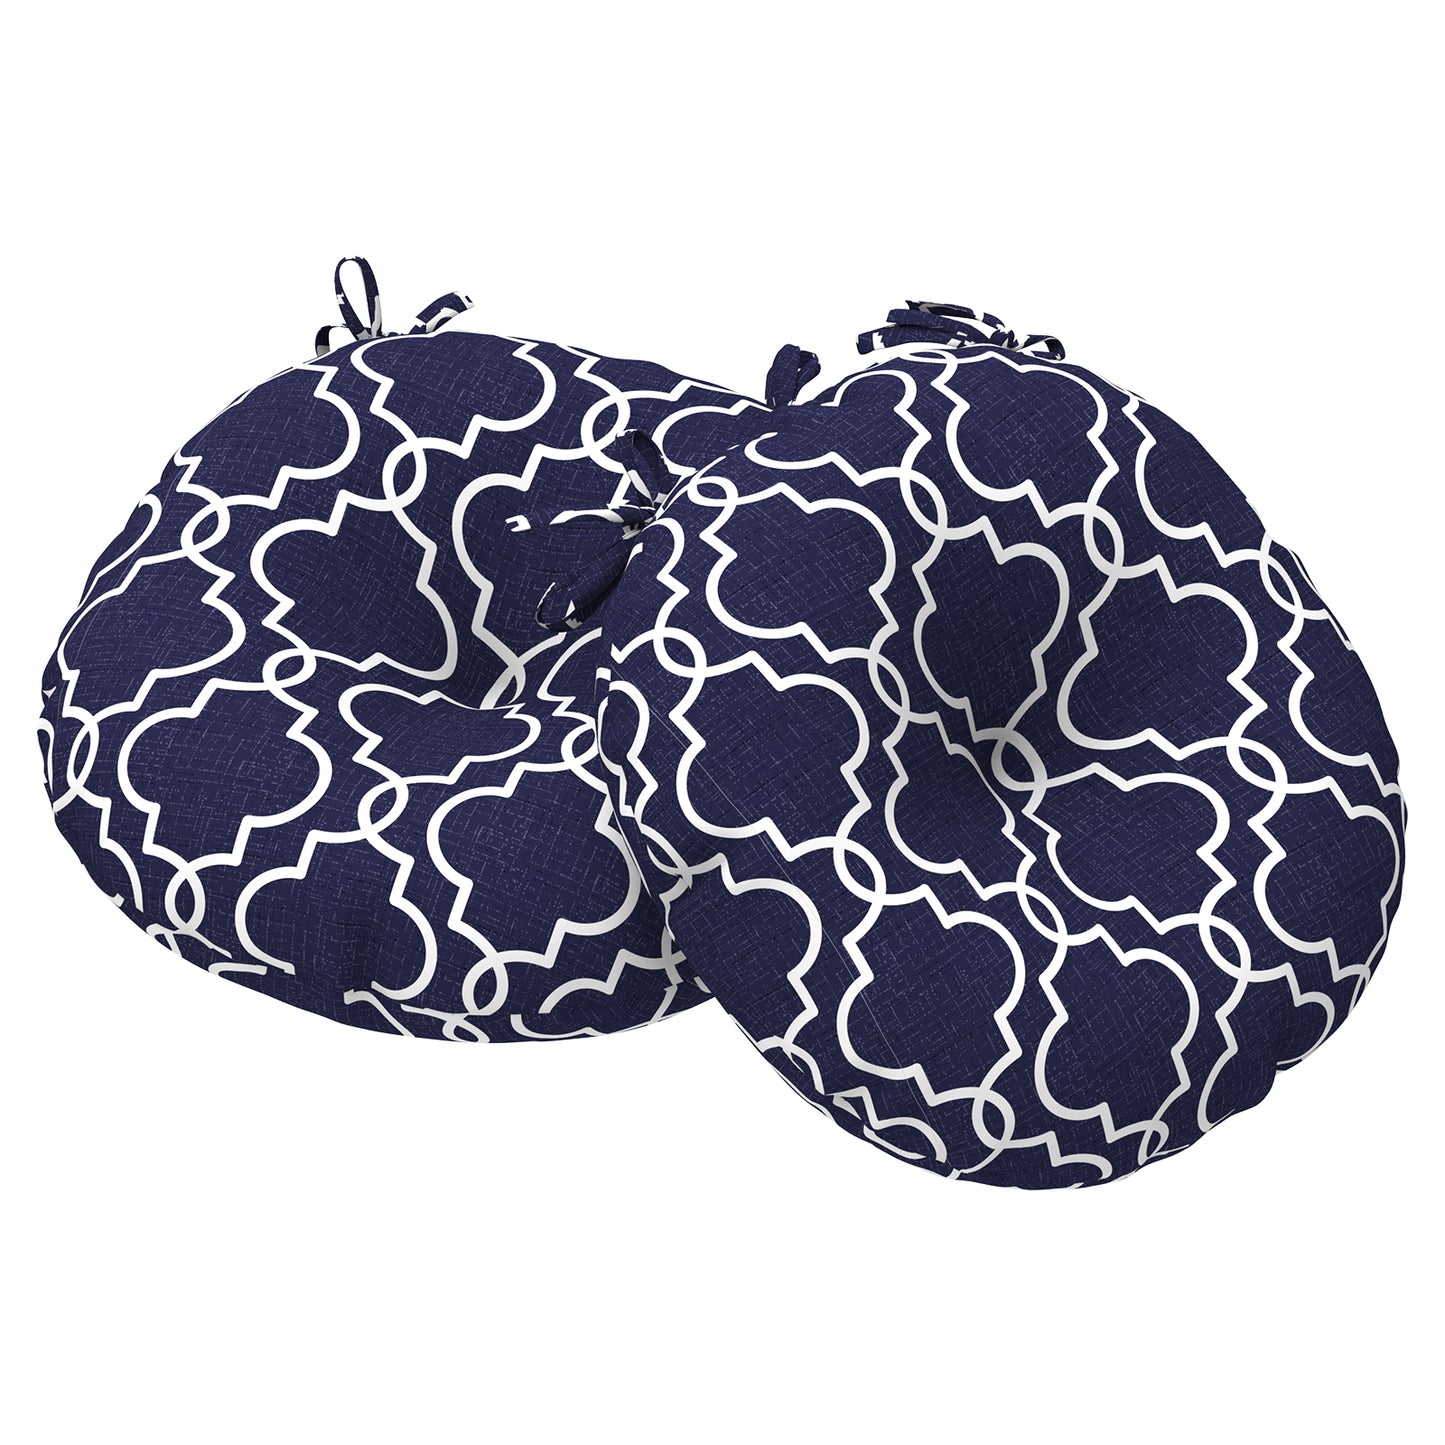 Melody Elephant Outdoor Bistro Chair Cushions, Water Repellent Furniture Chair Pads Set of 2, Round Pillow for Decoration Home and Garden, 15”x15”x4”, Carmody Navy